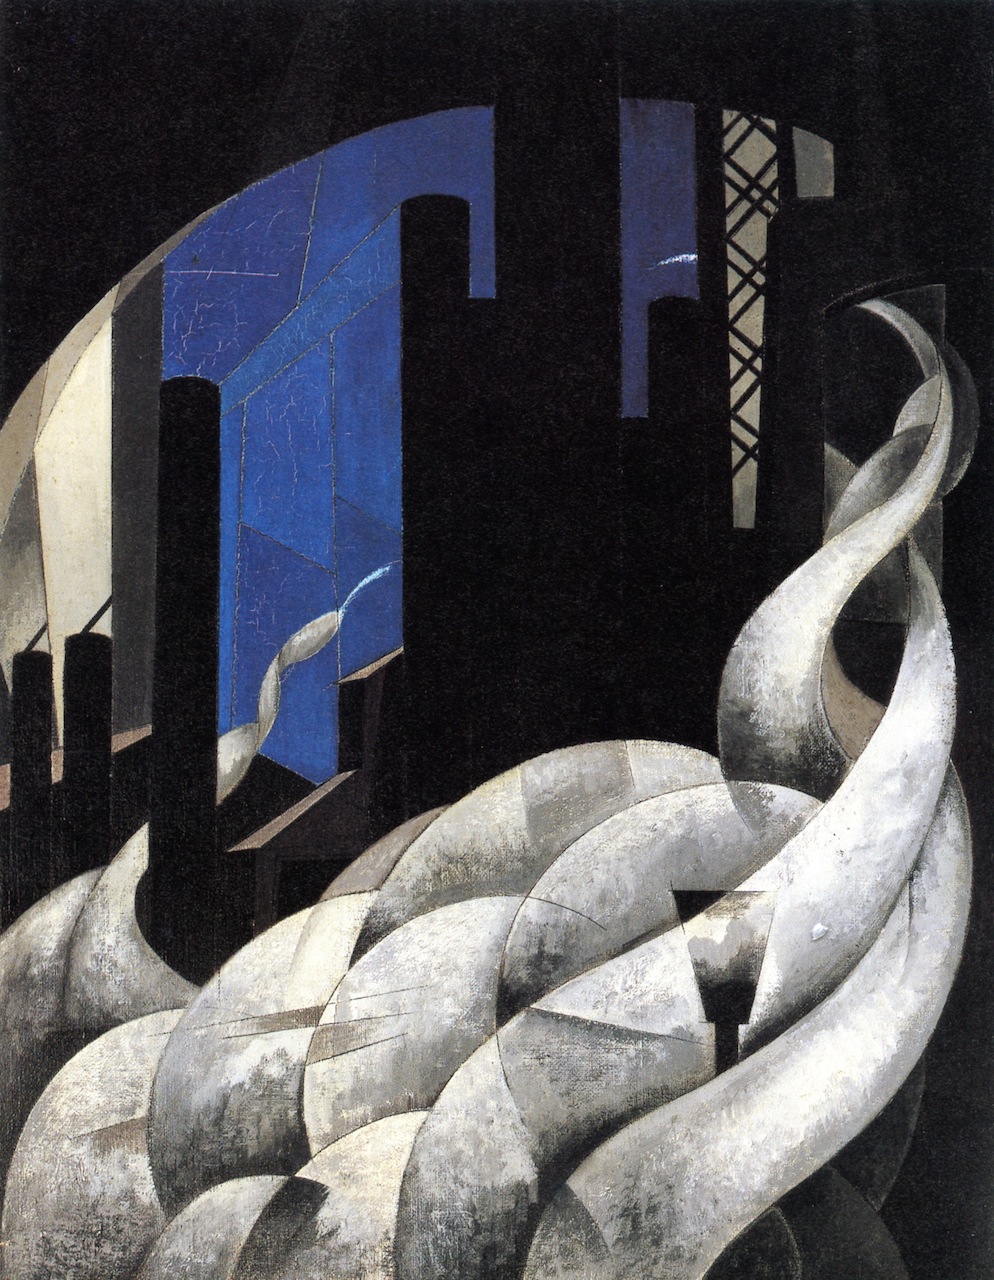 Charles Demuth, Incense of a New Church, 1921, as reproduced in Art in Time